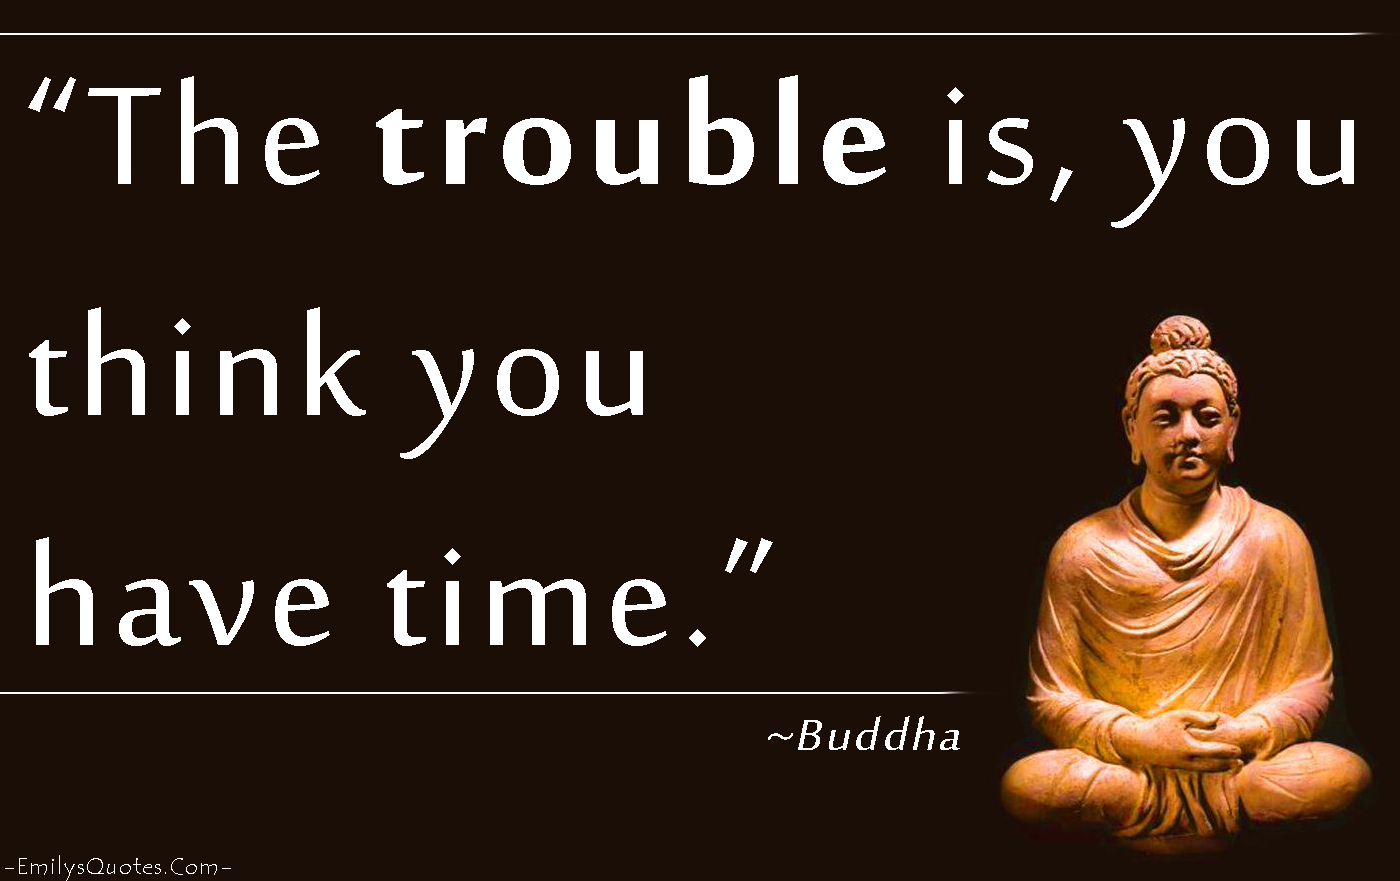 The trouble is you think you have time. Buddha